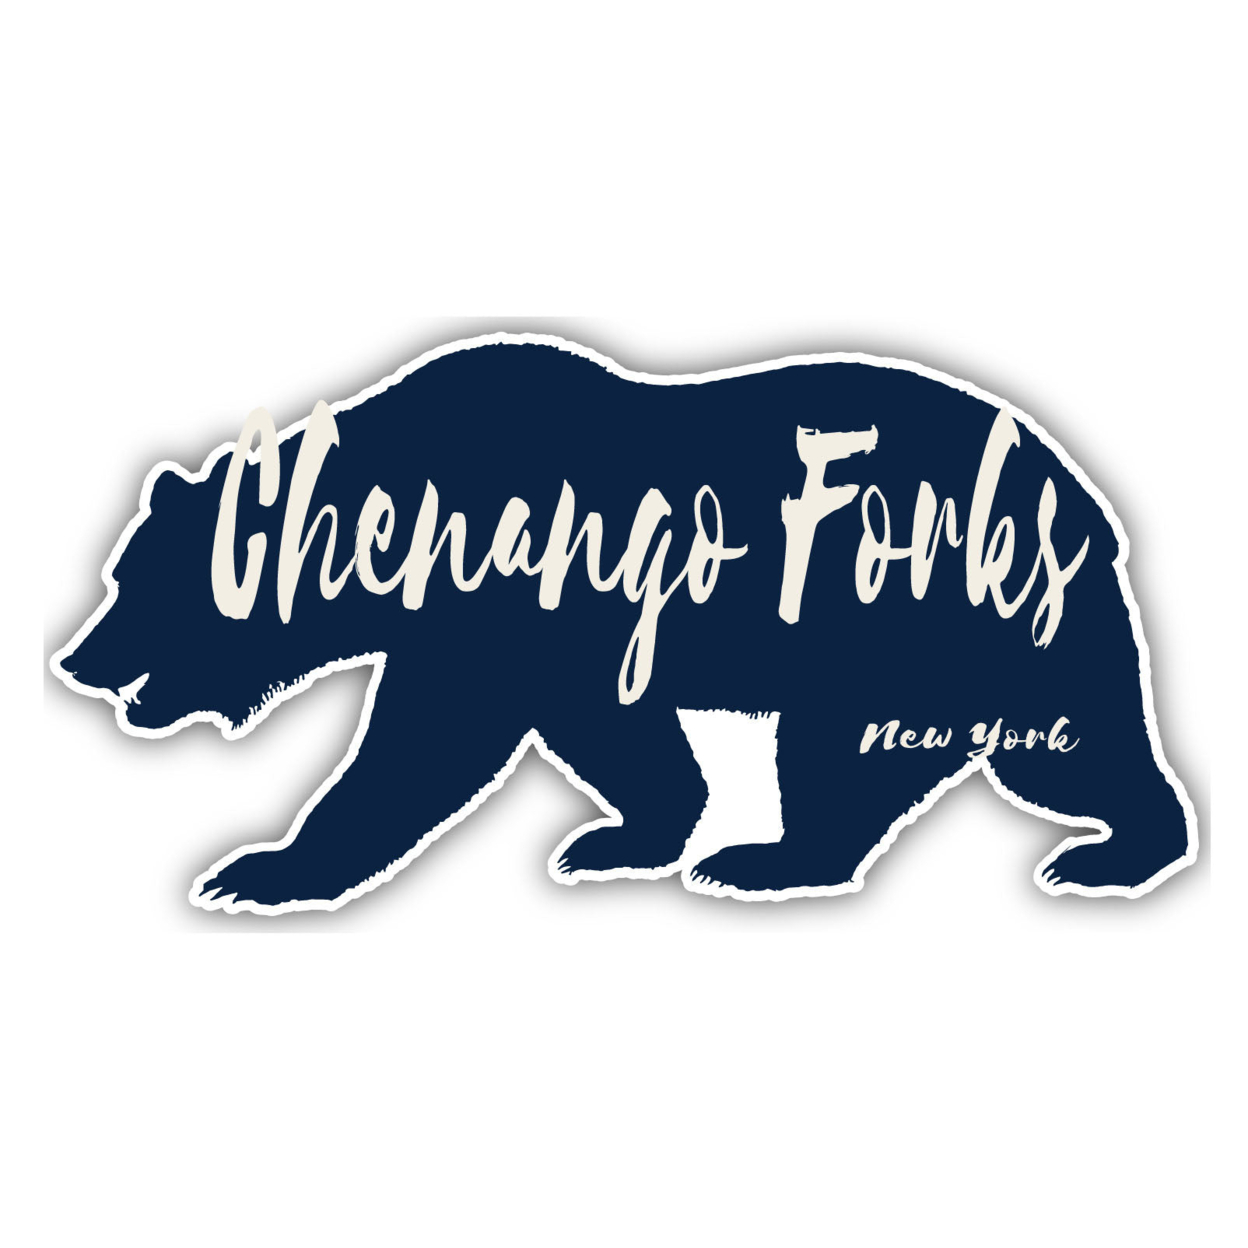 Chenango Forks New York Souvenir Decorative Stickers (Choose Theme And Size) - 4-Pack, 2-Inch, Bear